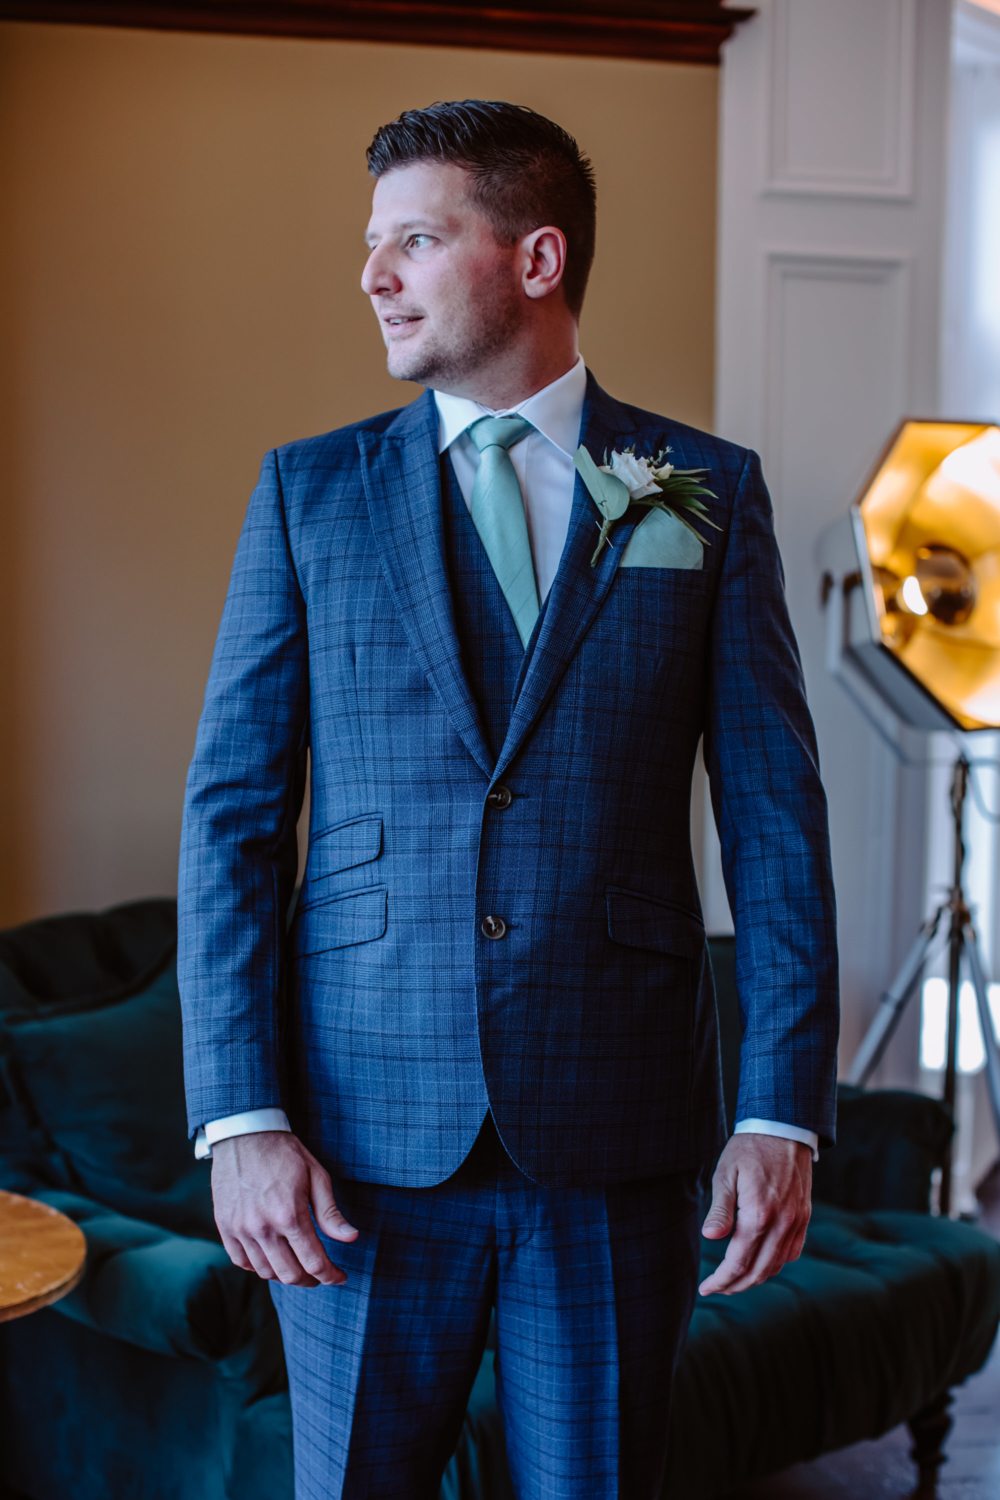 Groom dressed in the suit posing for the portrait looking out the window